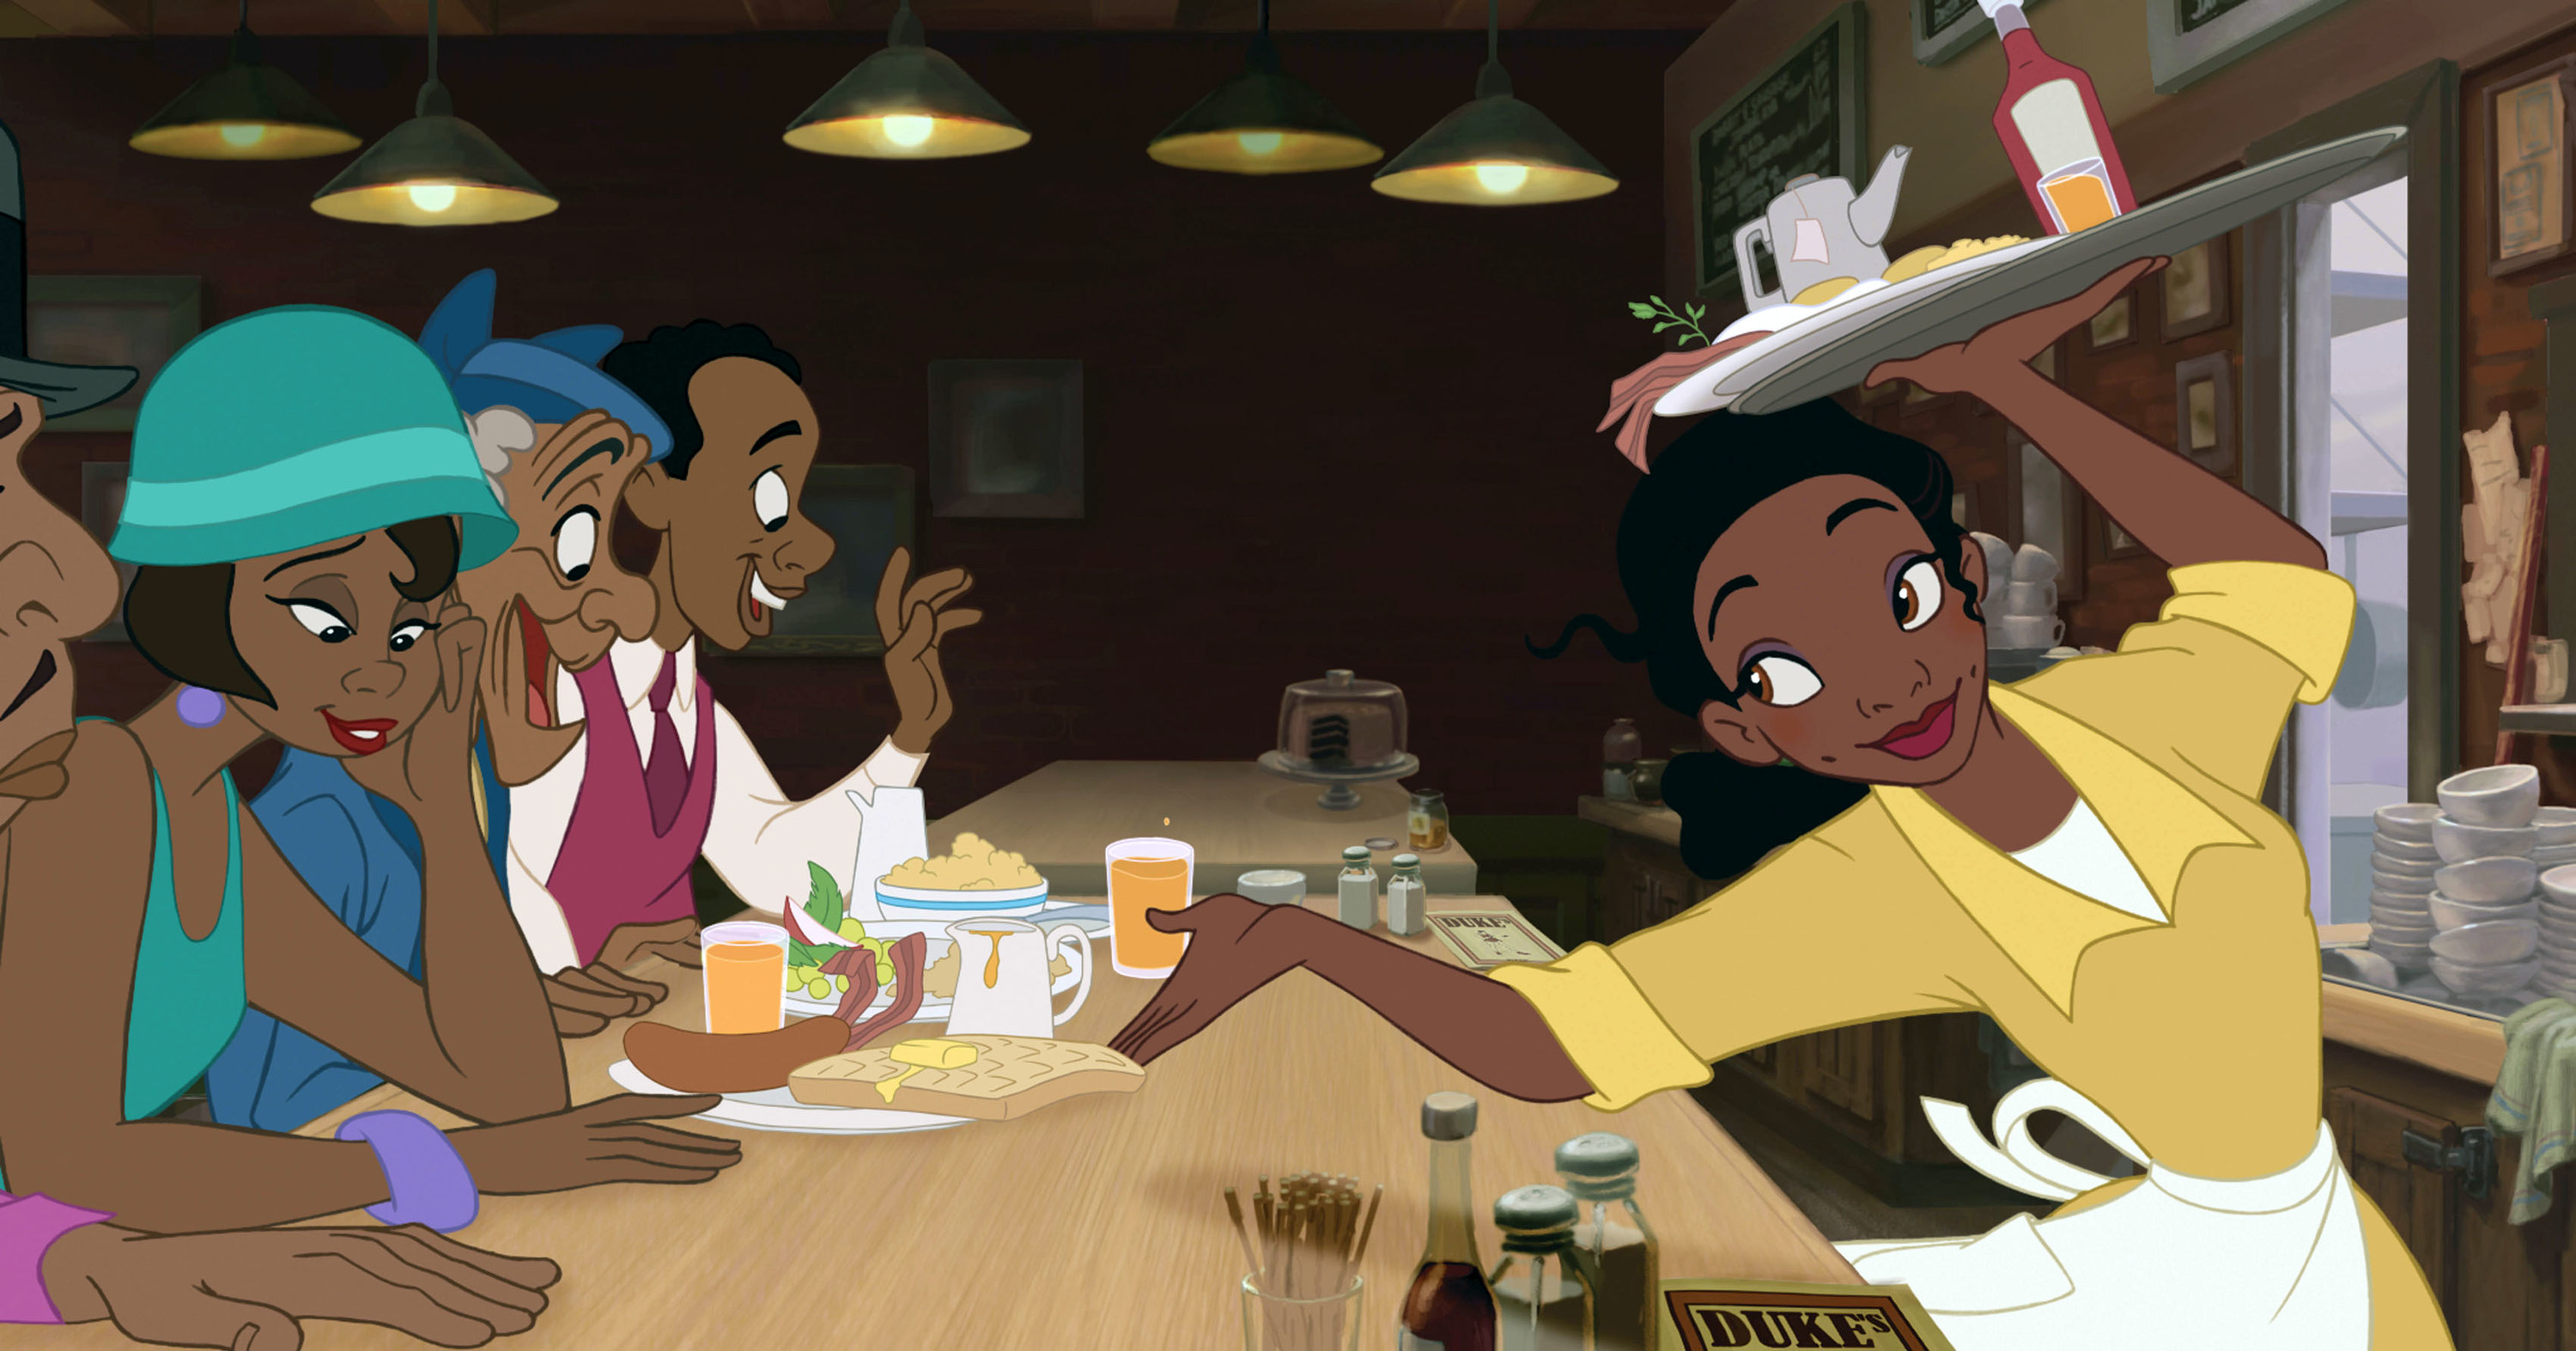 Photo of Princess Tiana at her waitress job lifting a tray with her left hand